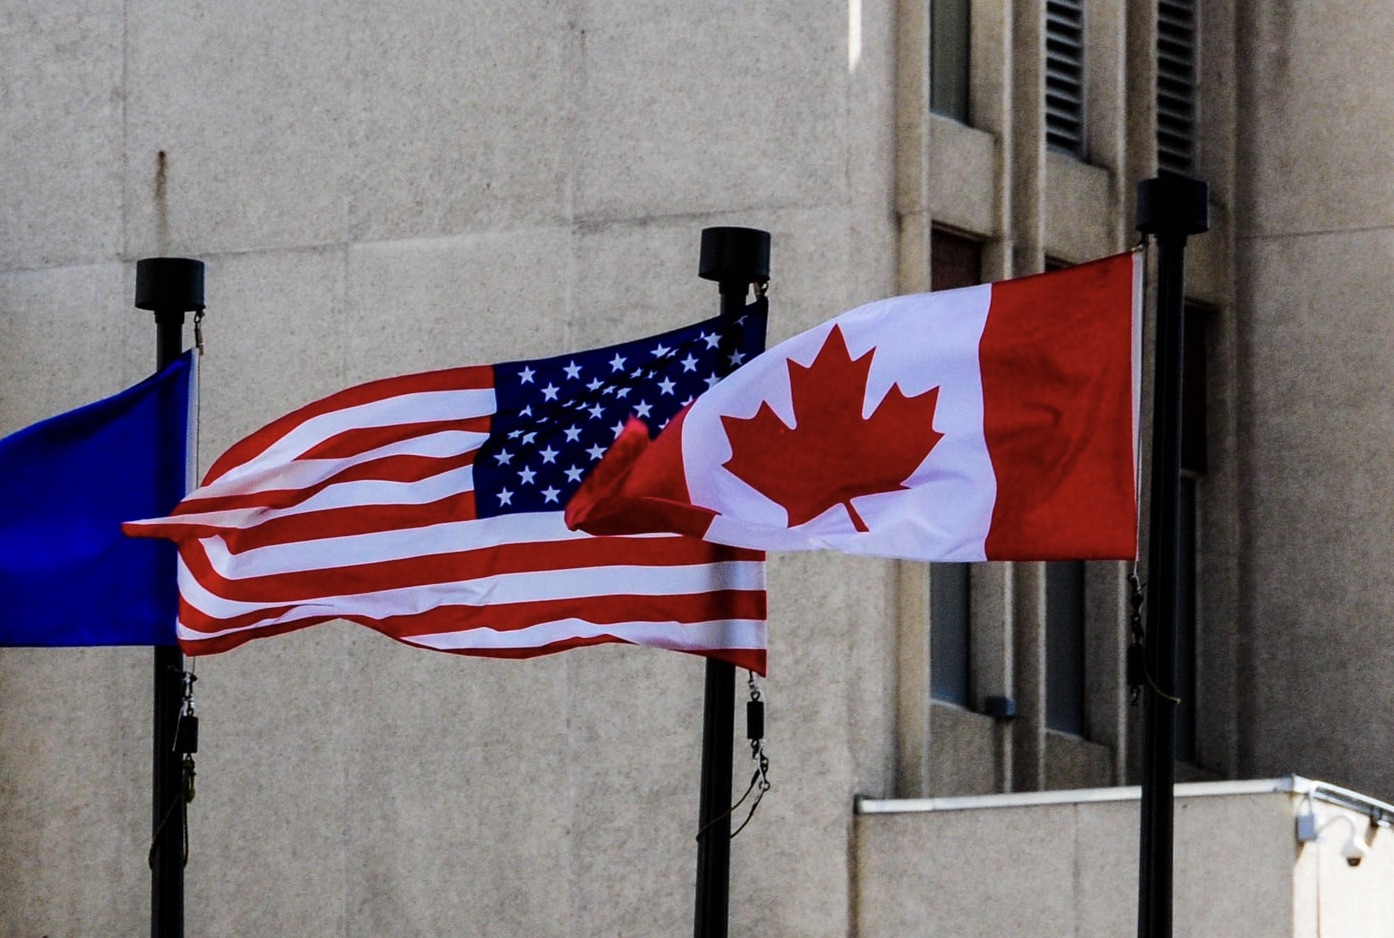 The US and Canadian flags side by side